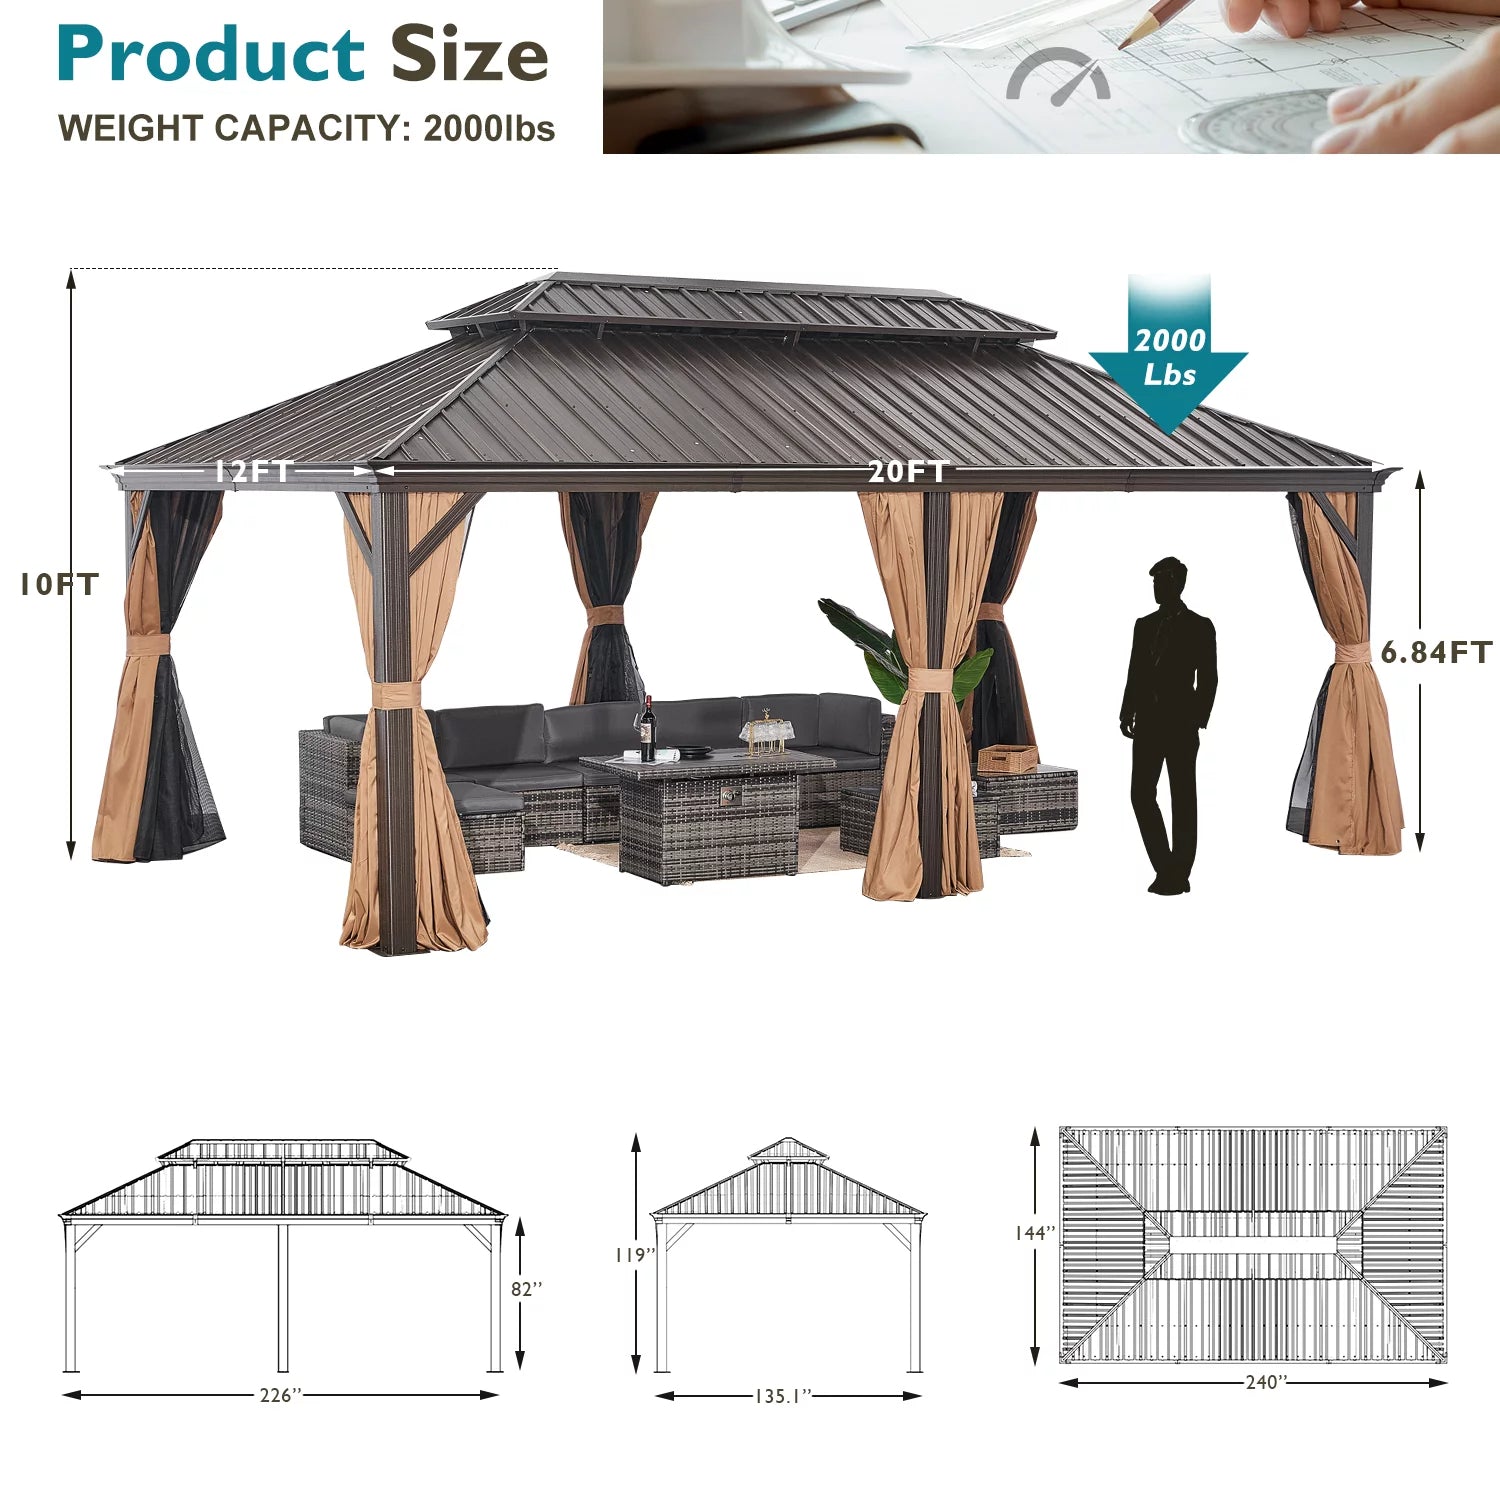 12'x20' Hardtop Gazebo, Outdoor Steel Double Roof Canopy, Aluminum Frame Permanent Pavilion with Curtains and Netting, Sunshade for Garden, Patio, Lawns